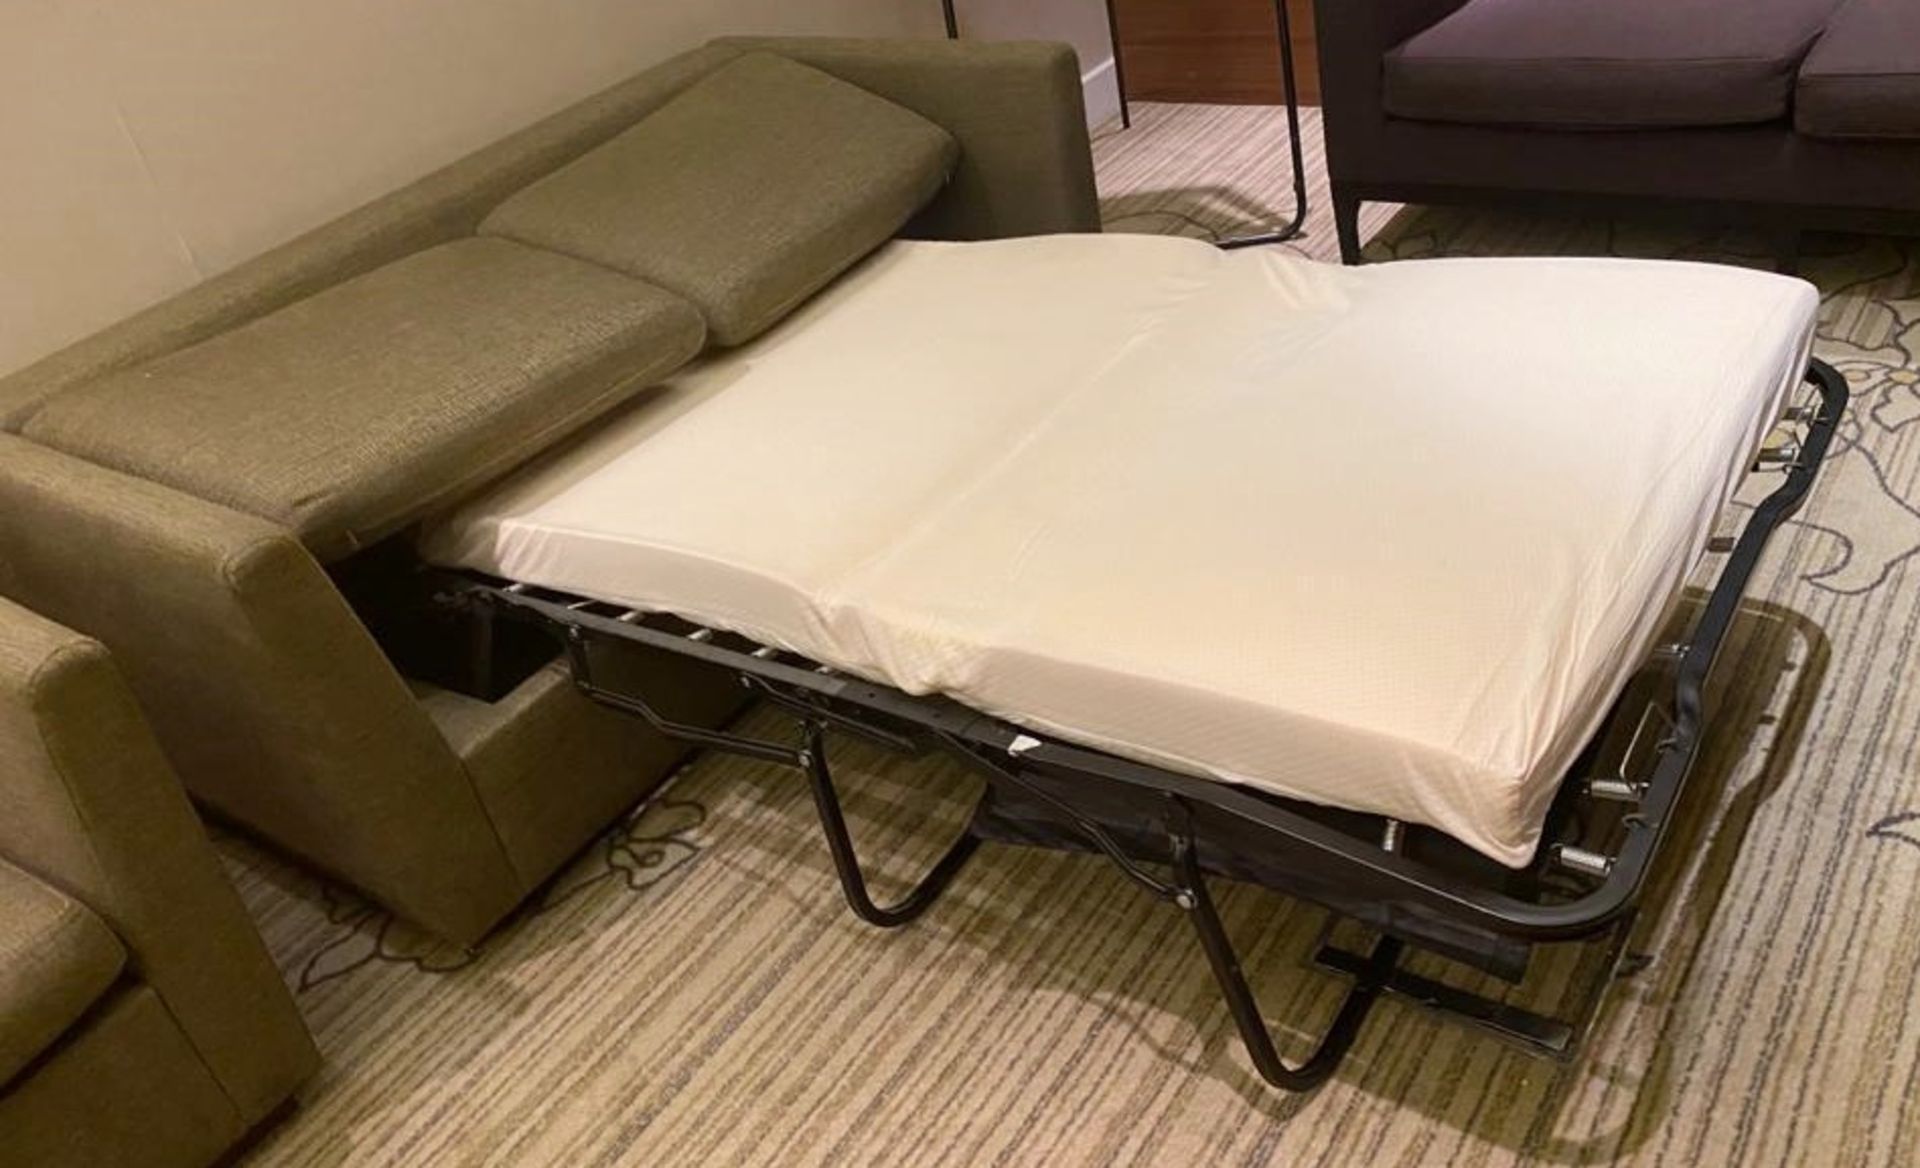 1 x 2-Seater Fold-out Sofa Bed Futon, Upholstered in a Premium Woven Fabric - Recently Procured From - Image 2 of 4